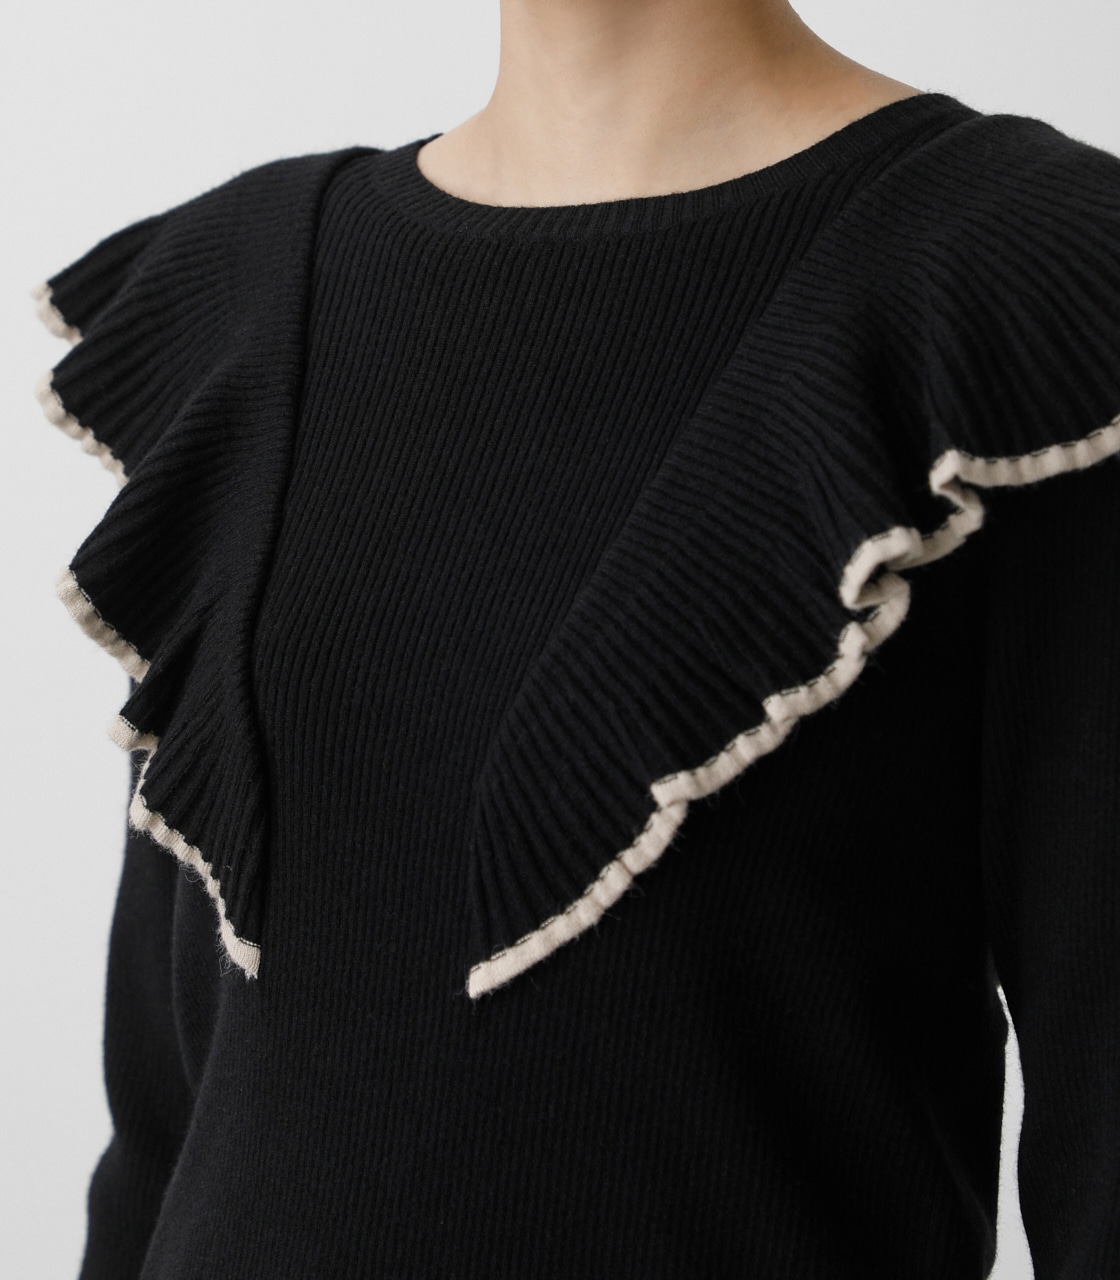 FRONT FRILLED KNIT TOPS/フロントフリルニットトップス 詳細画像 BLK 8